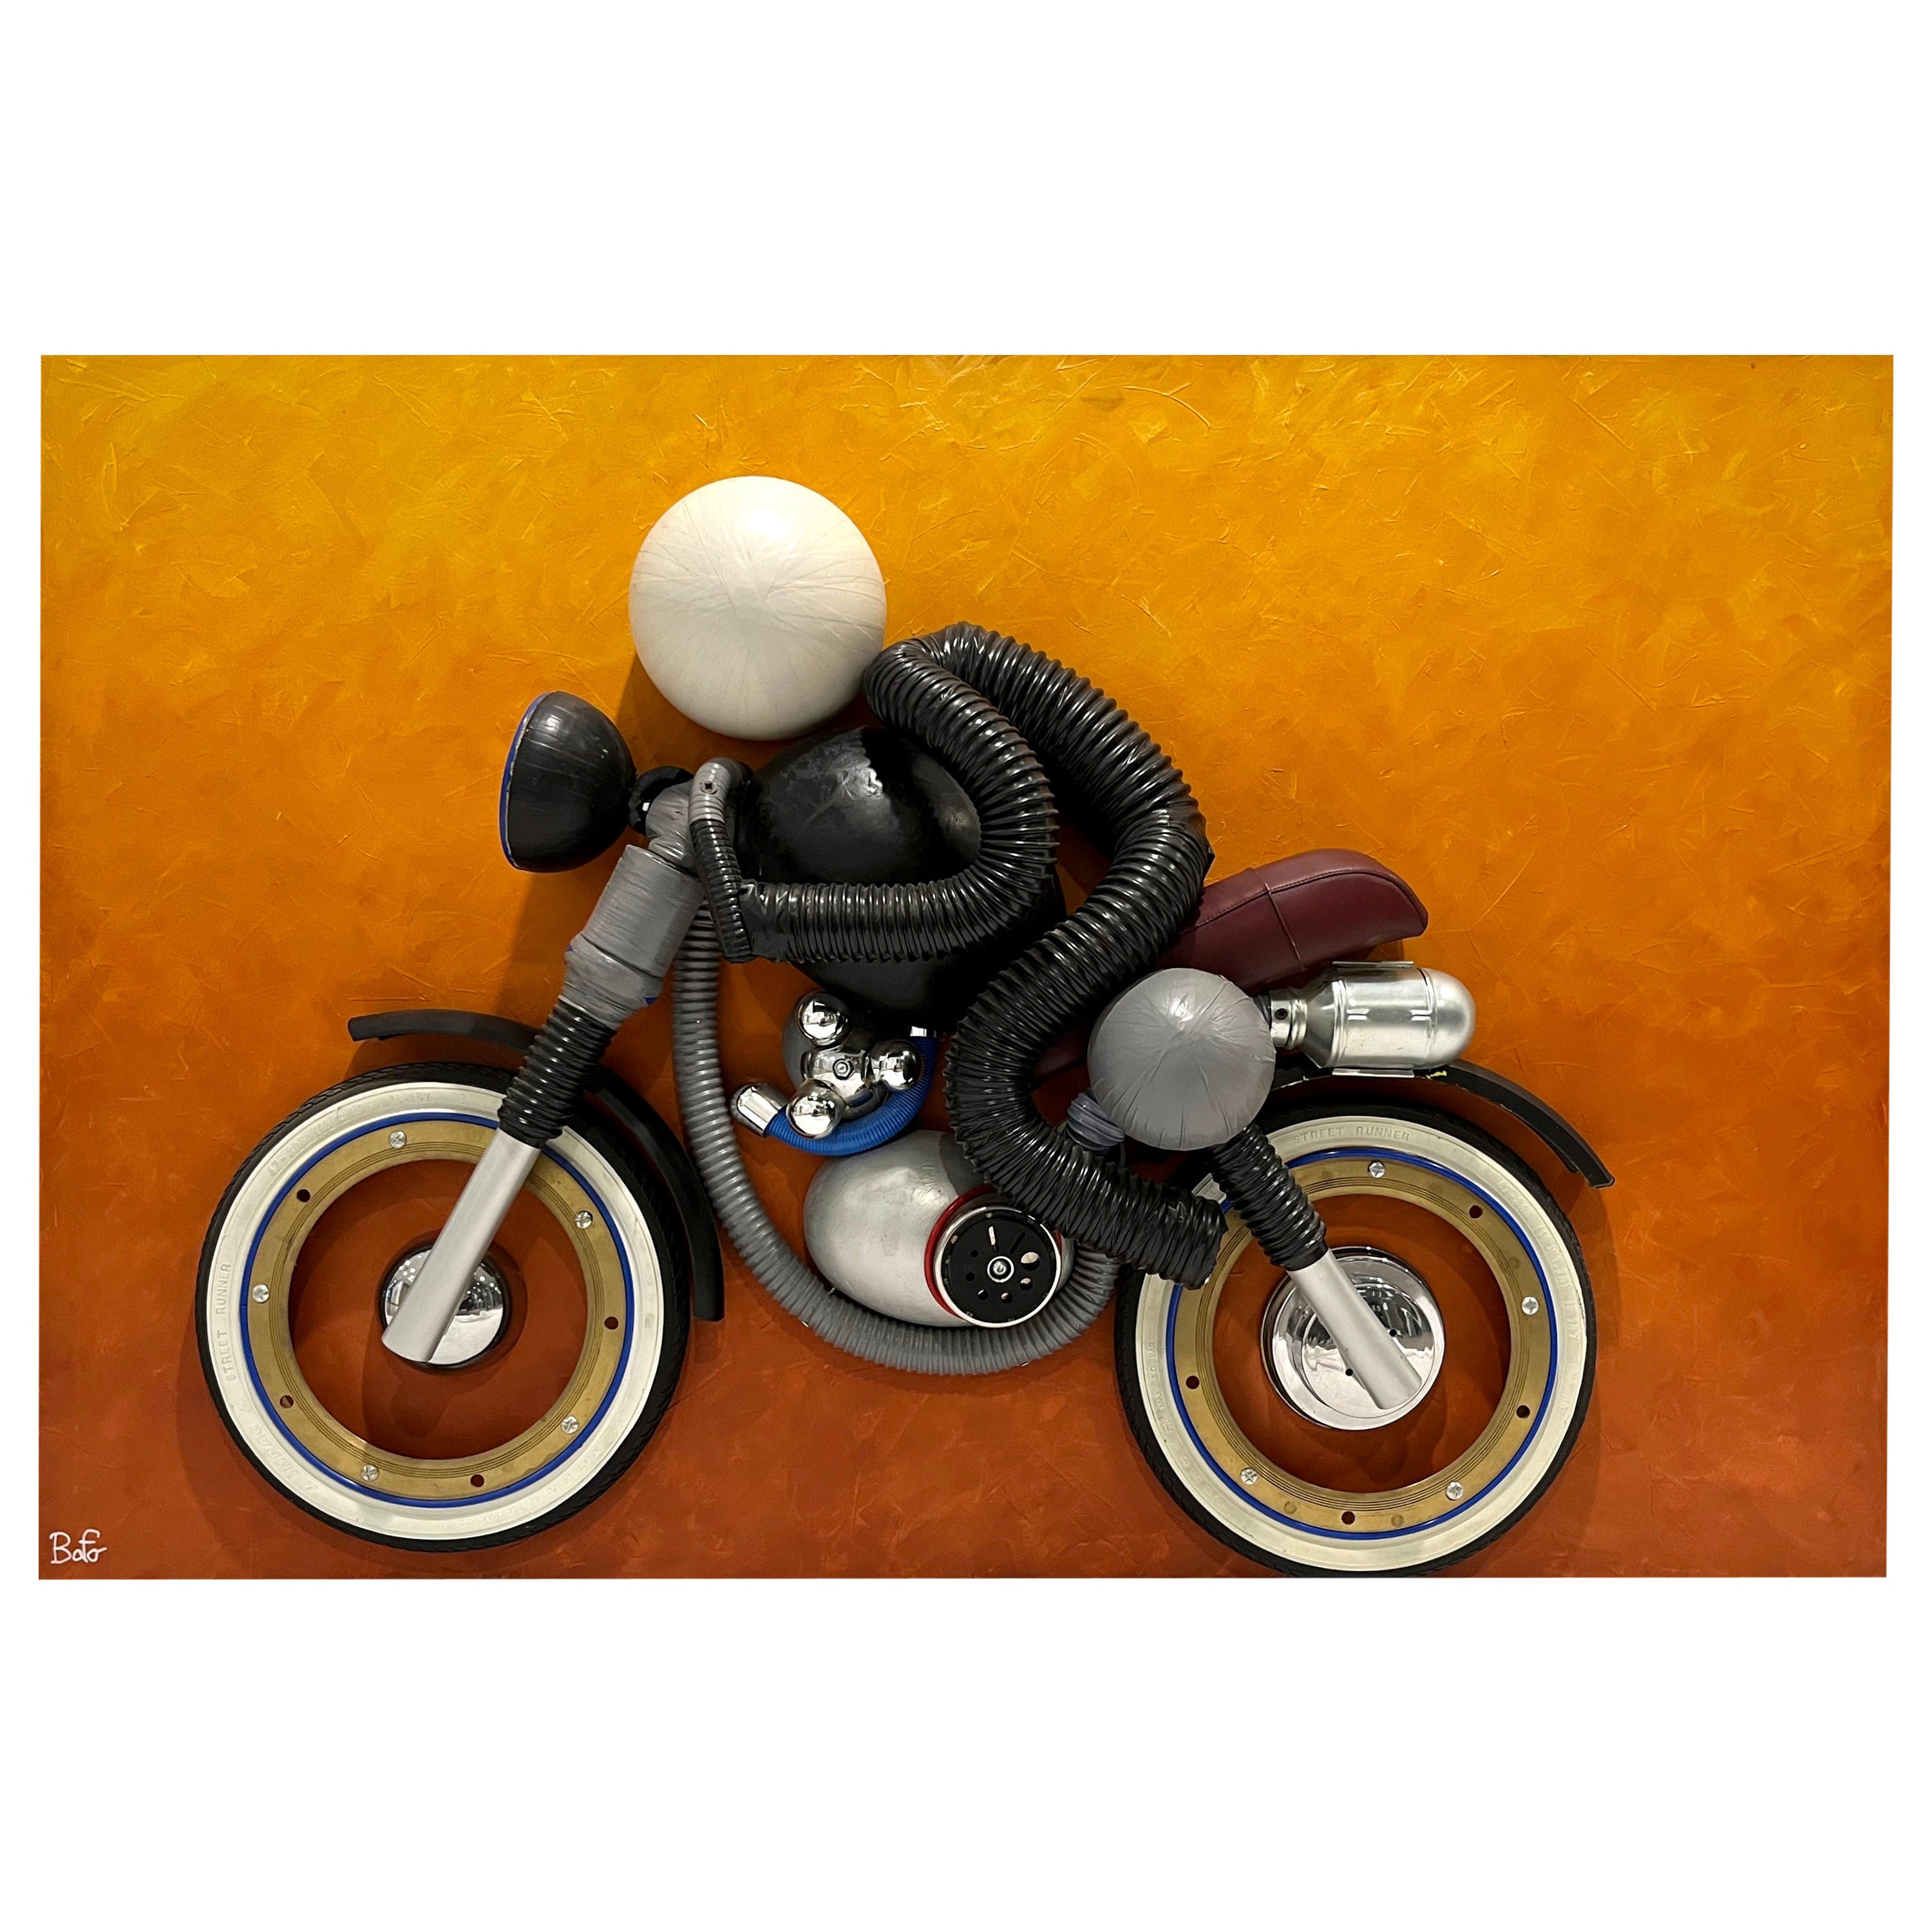 Contemporary Italian Found Objects Recycled Art Sculpture of a Biker Signed Bafo For Sale